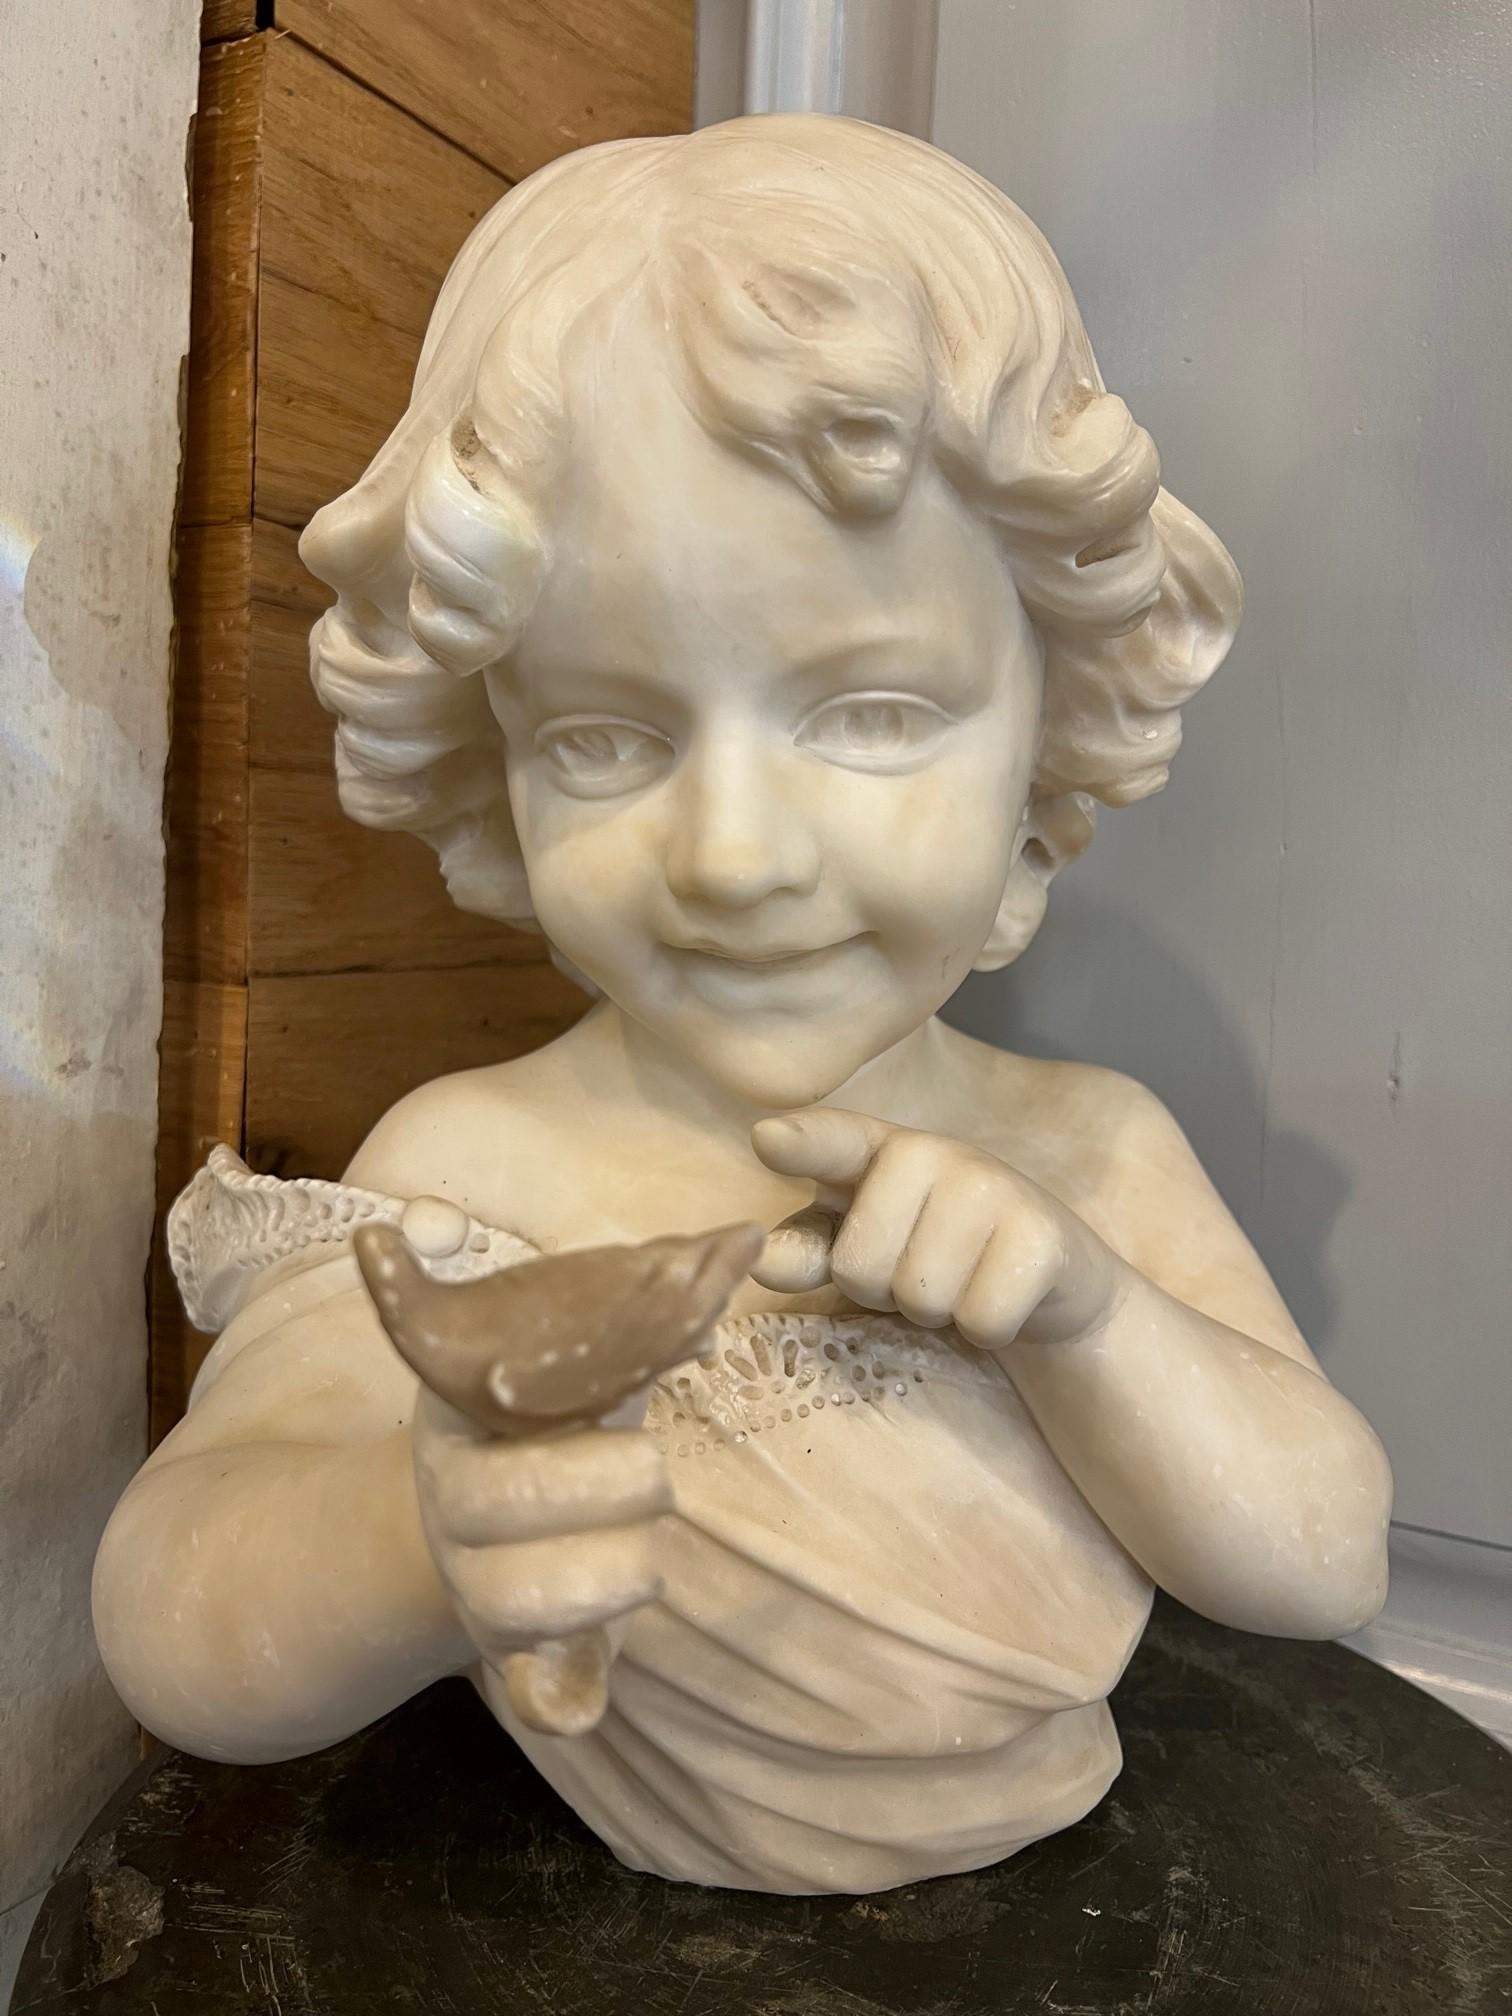 Fabulous antique alabaster bust of a young girl holding a small bird. The details are amazing and the young girl has a beautiful smile as she points to the small bird. She's in good condition but is missing parts of her fingers in the hand holding